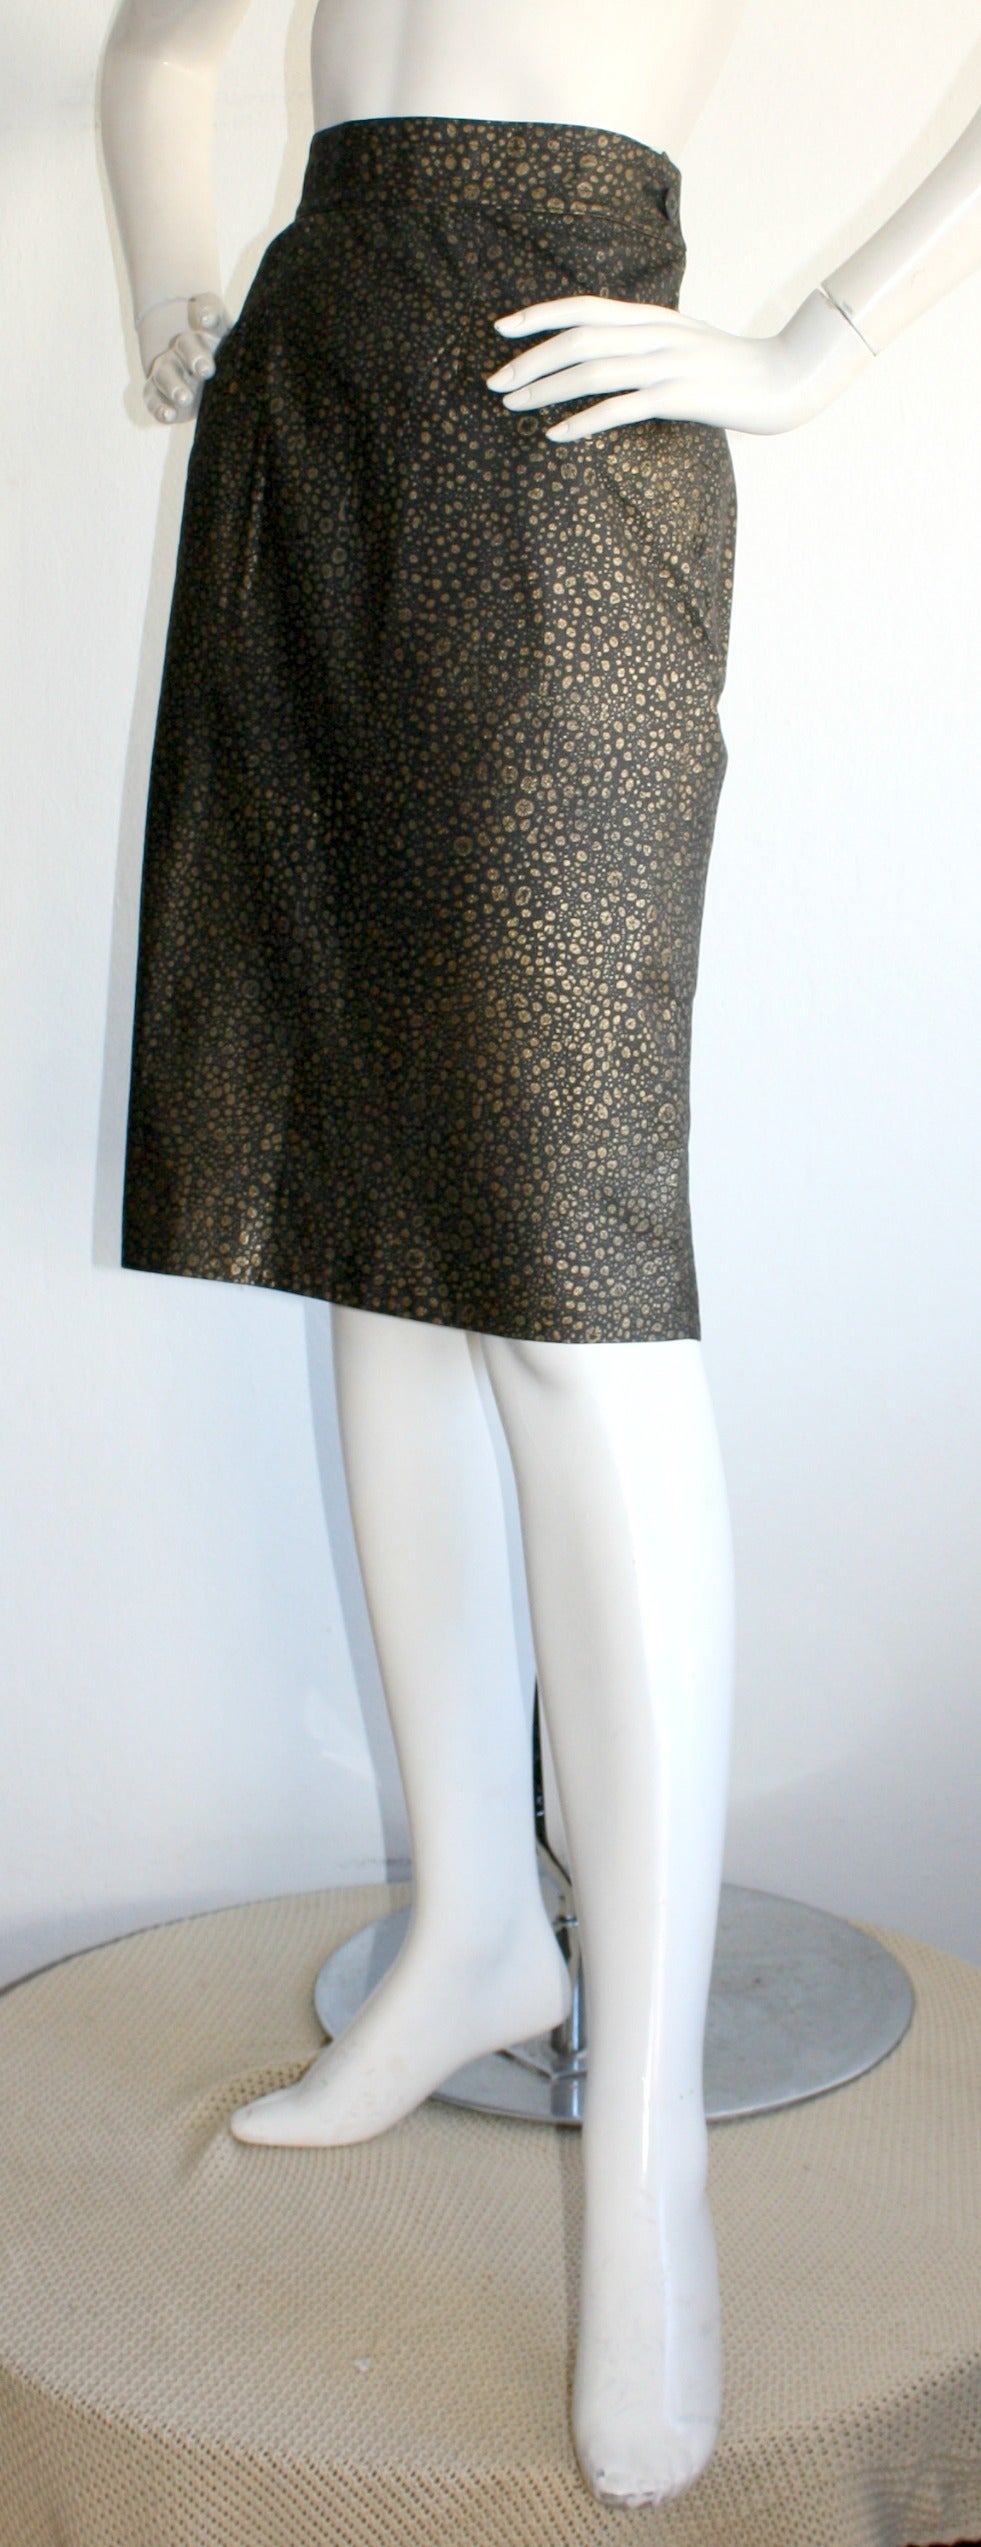 Very rare vintage Yves Saint Laurent YSL high waisted Pig Leather Skirt! Black leather, with tastefully splatters of gold metallic throughout. Stunning fit, with two pockets in front. Fully lined. In great condition. Marked Size EU